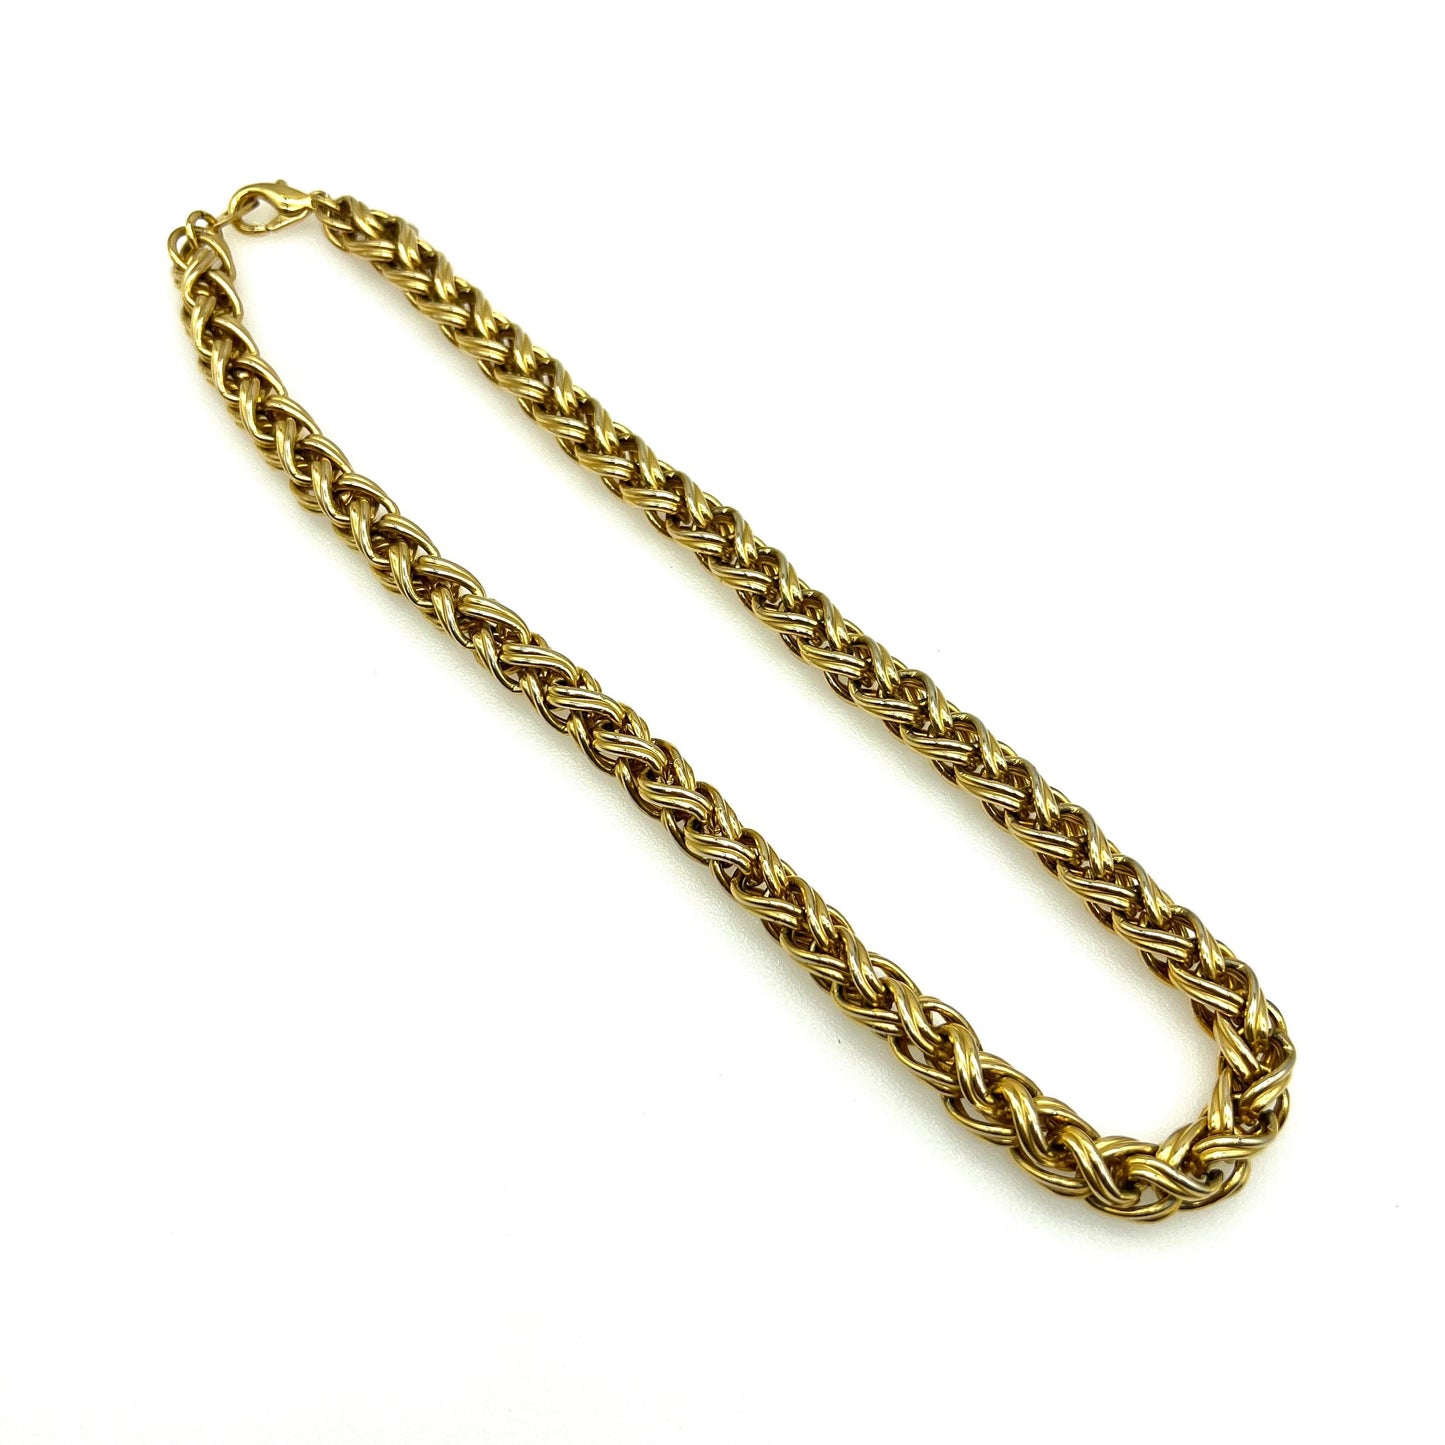 Heavy Wheat Chain 22ct Gold Plated Necklace